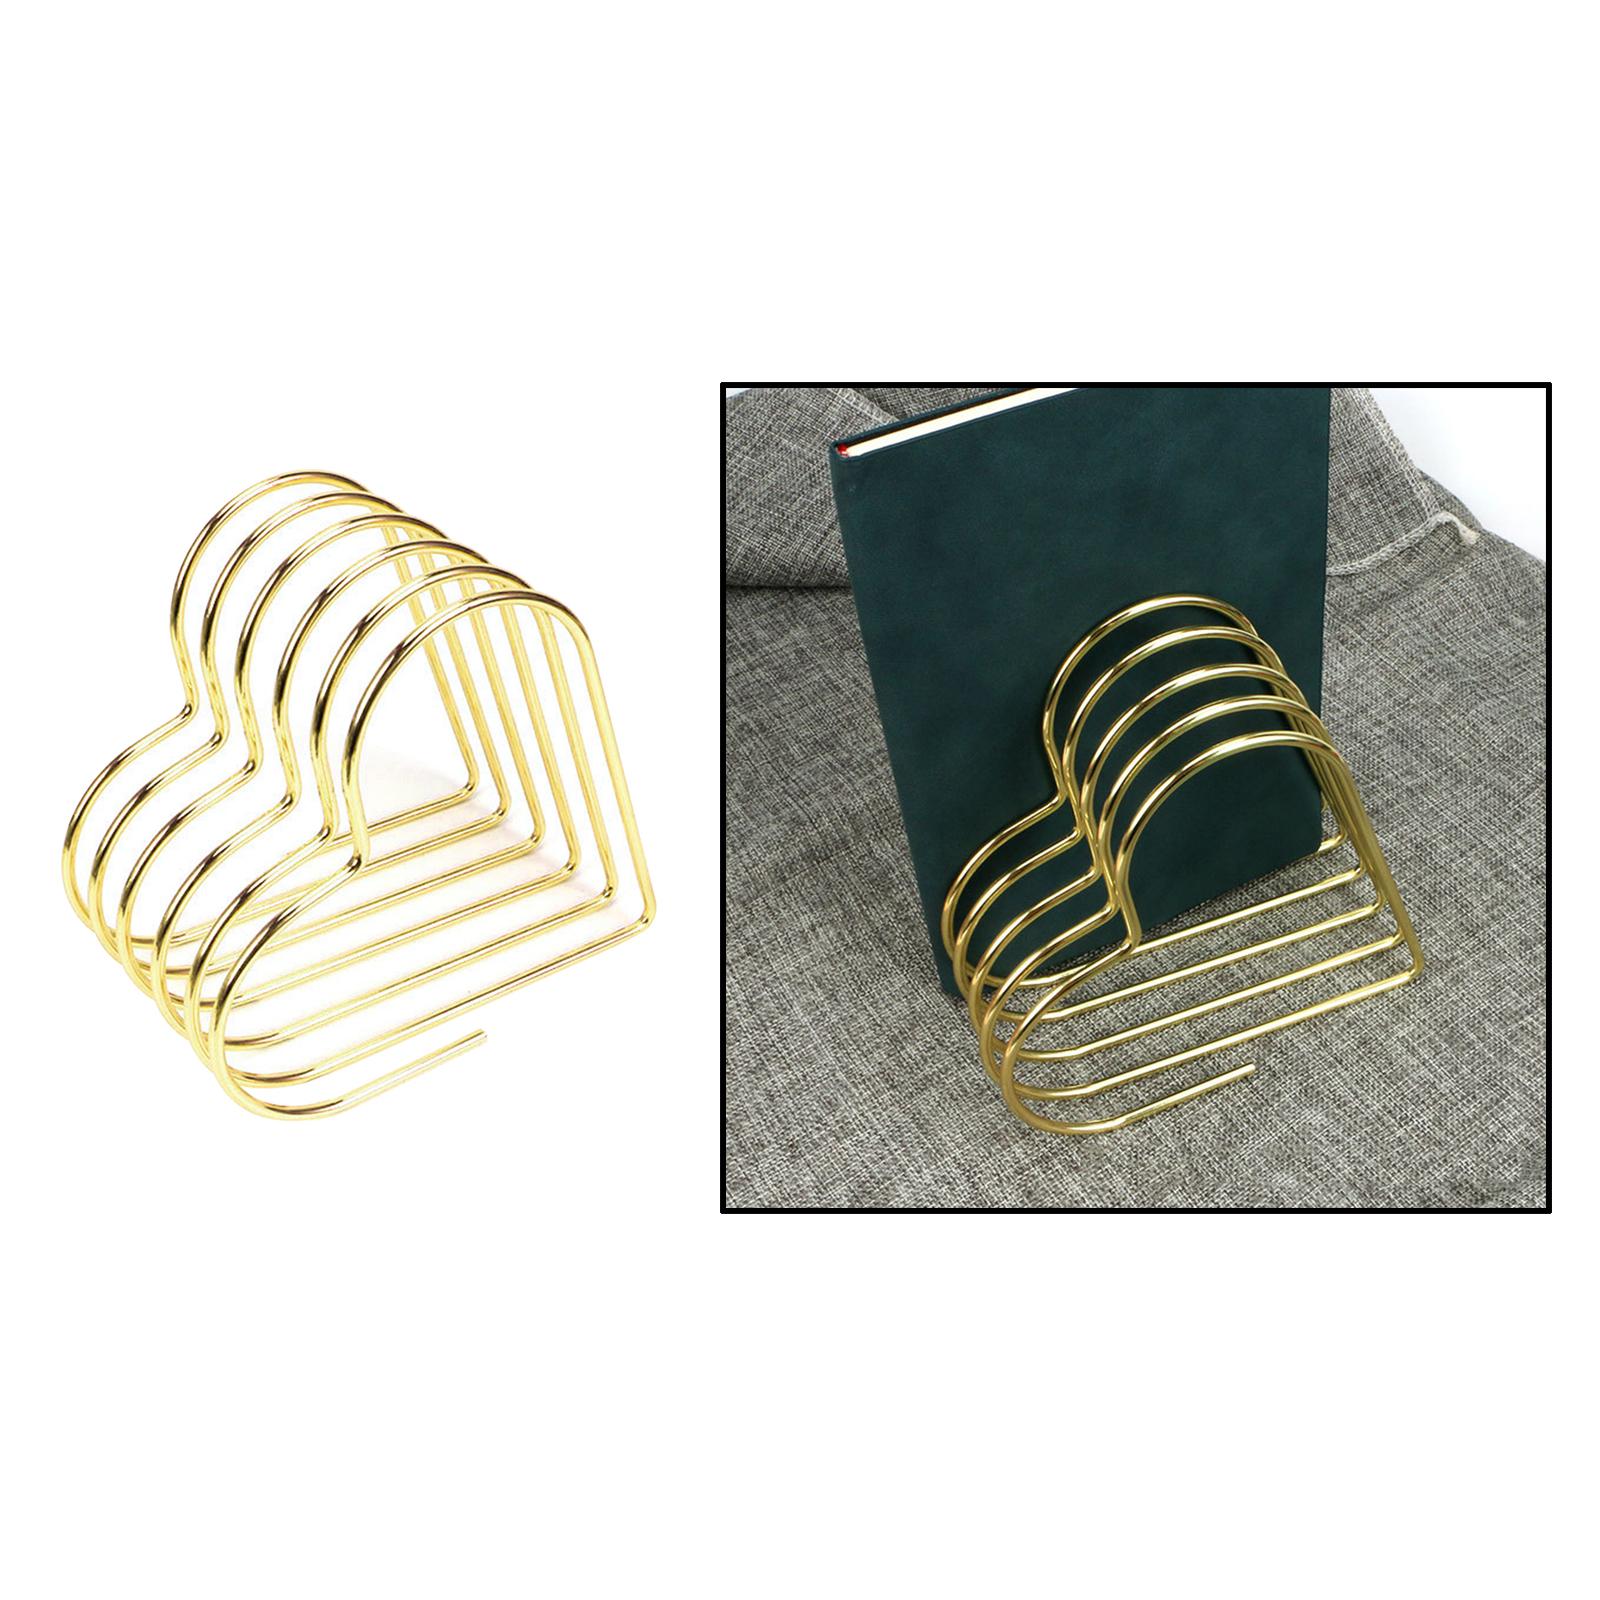 Office Iron Bookends Book Ends Supports Magazine Holder Heart Golden